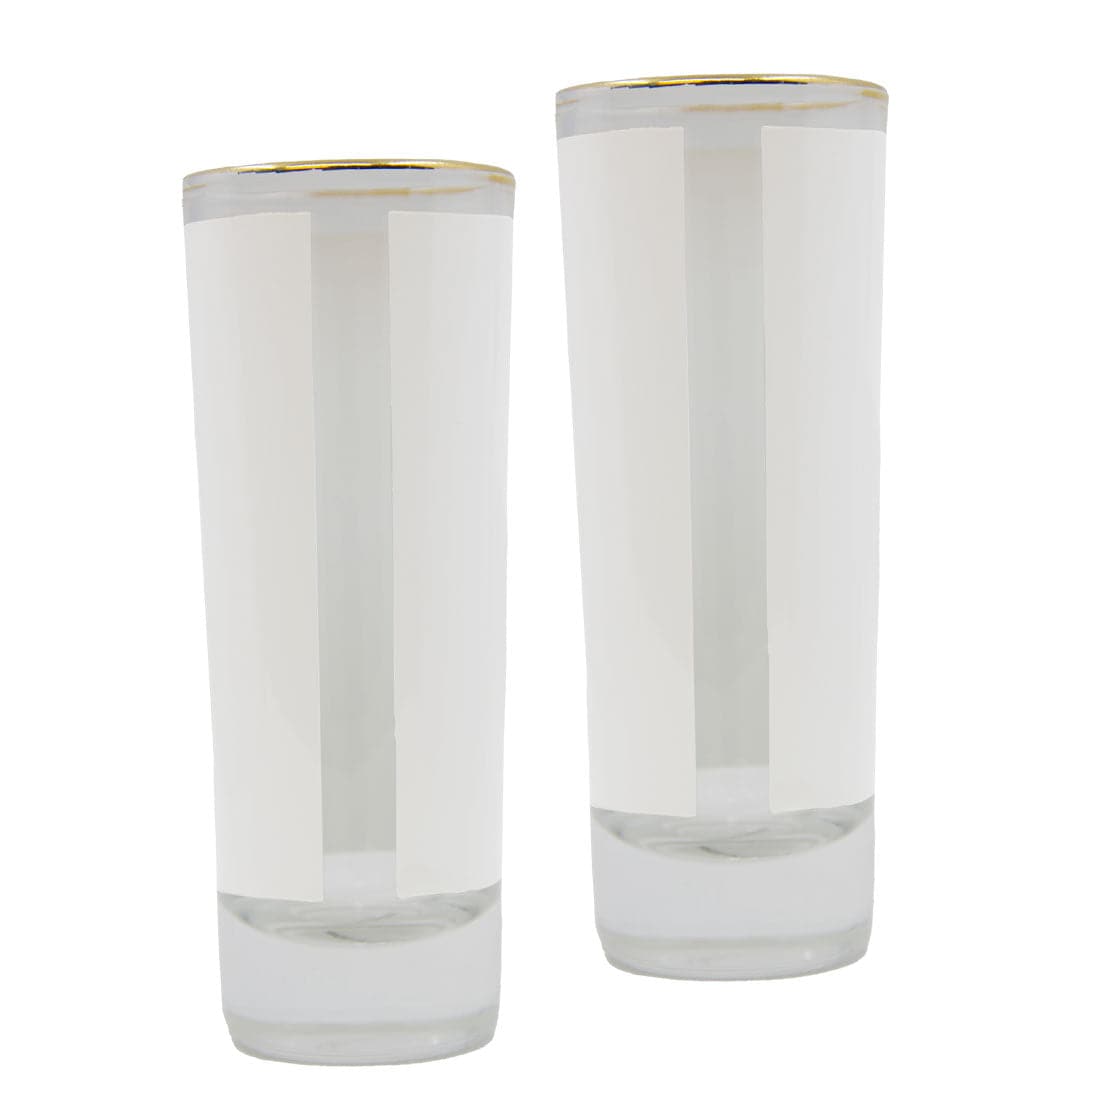 Pearl Coating™ 1.5oz Sublimation Shot Glass with Gold Rim - Pack of 12 - Joto Imaging Supplies US